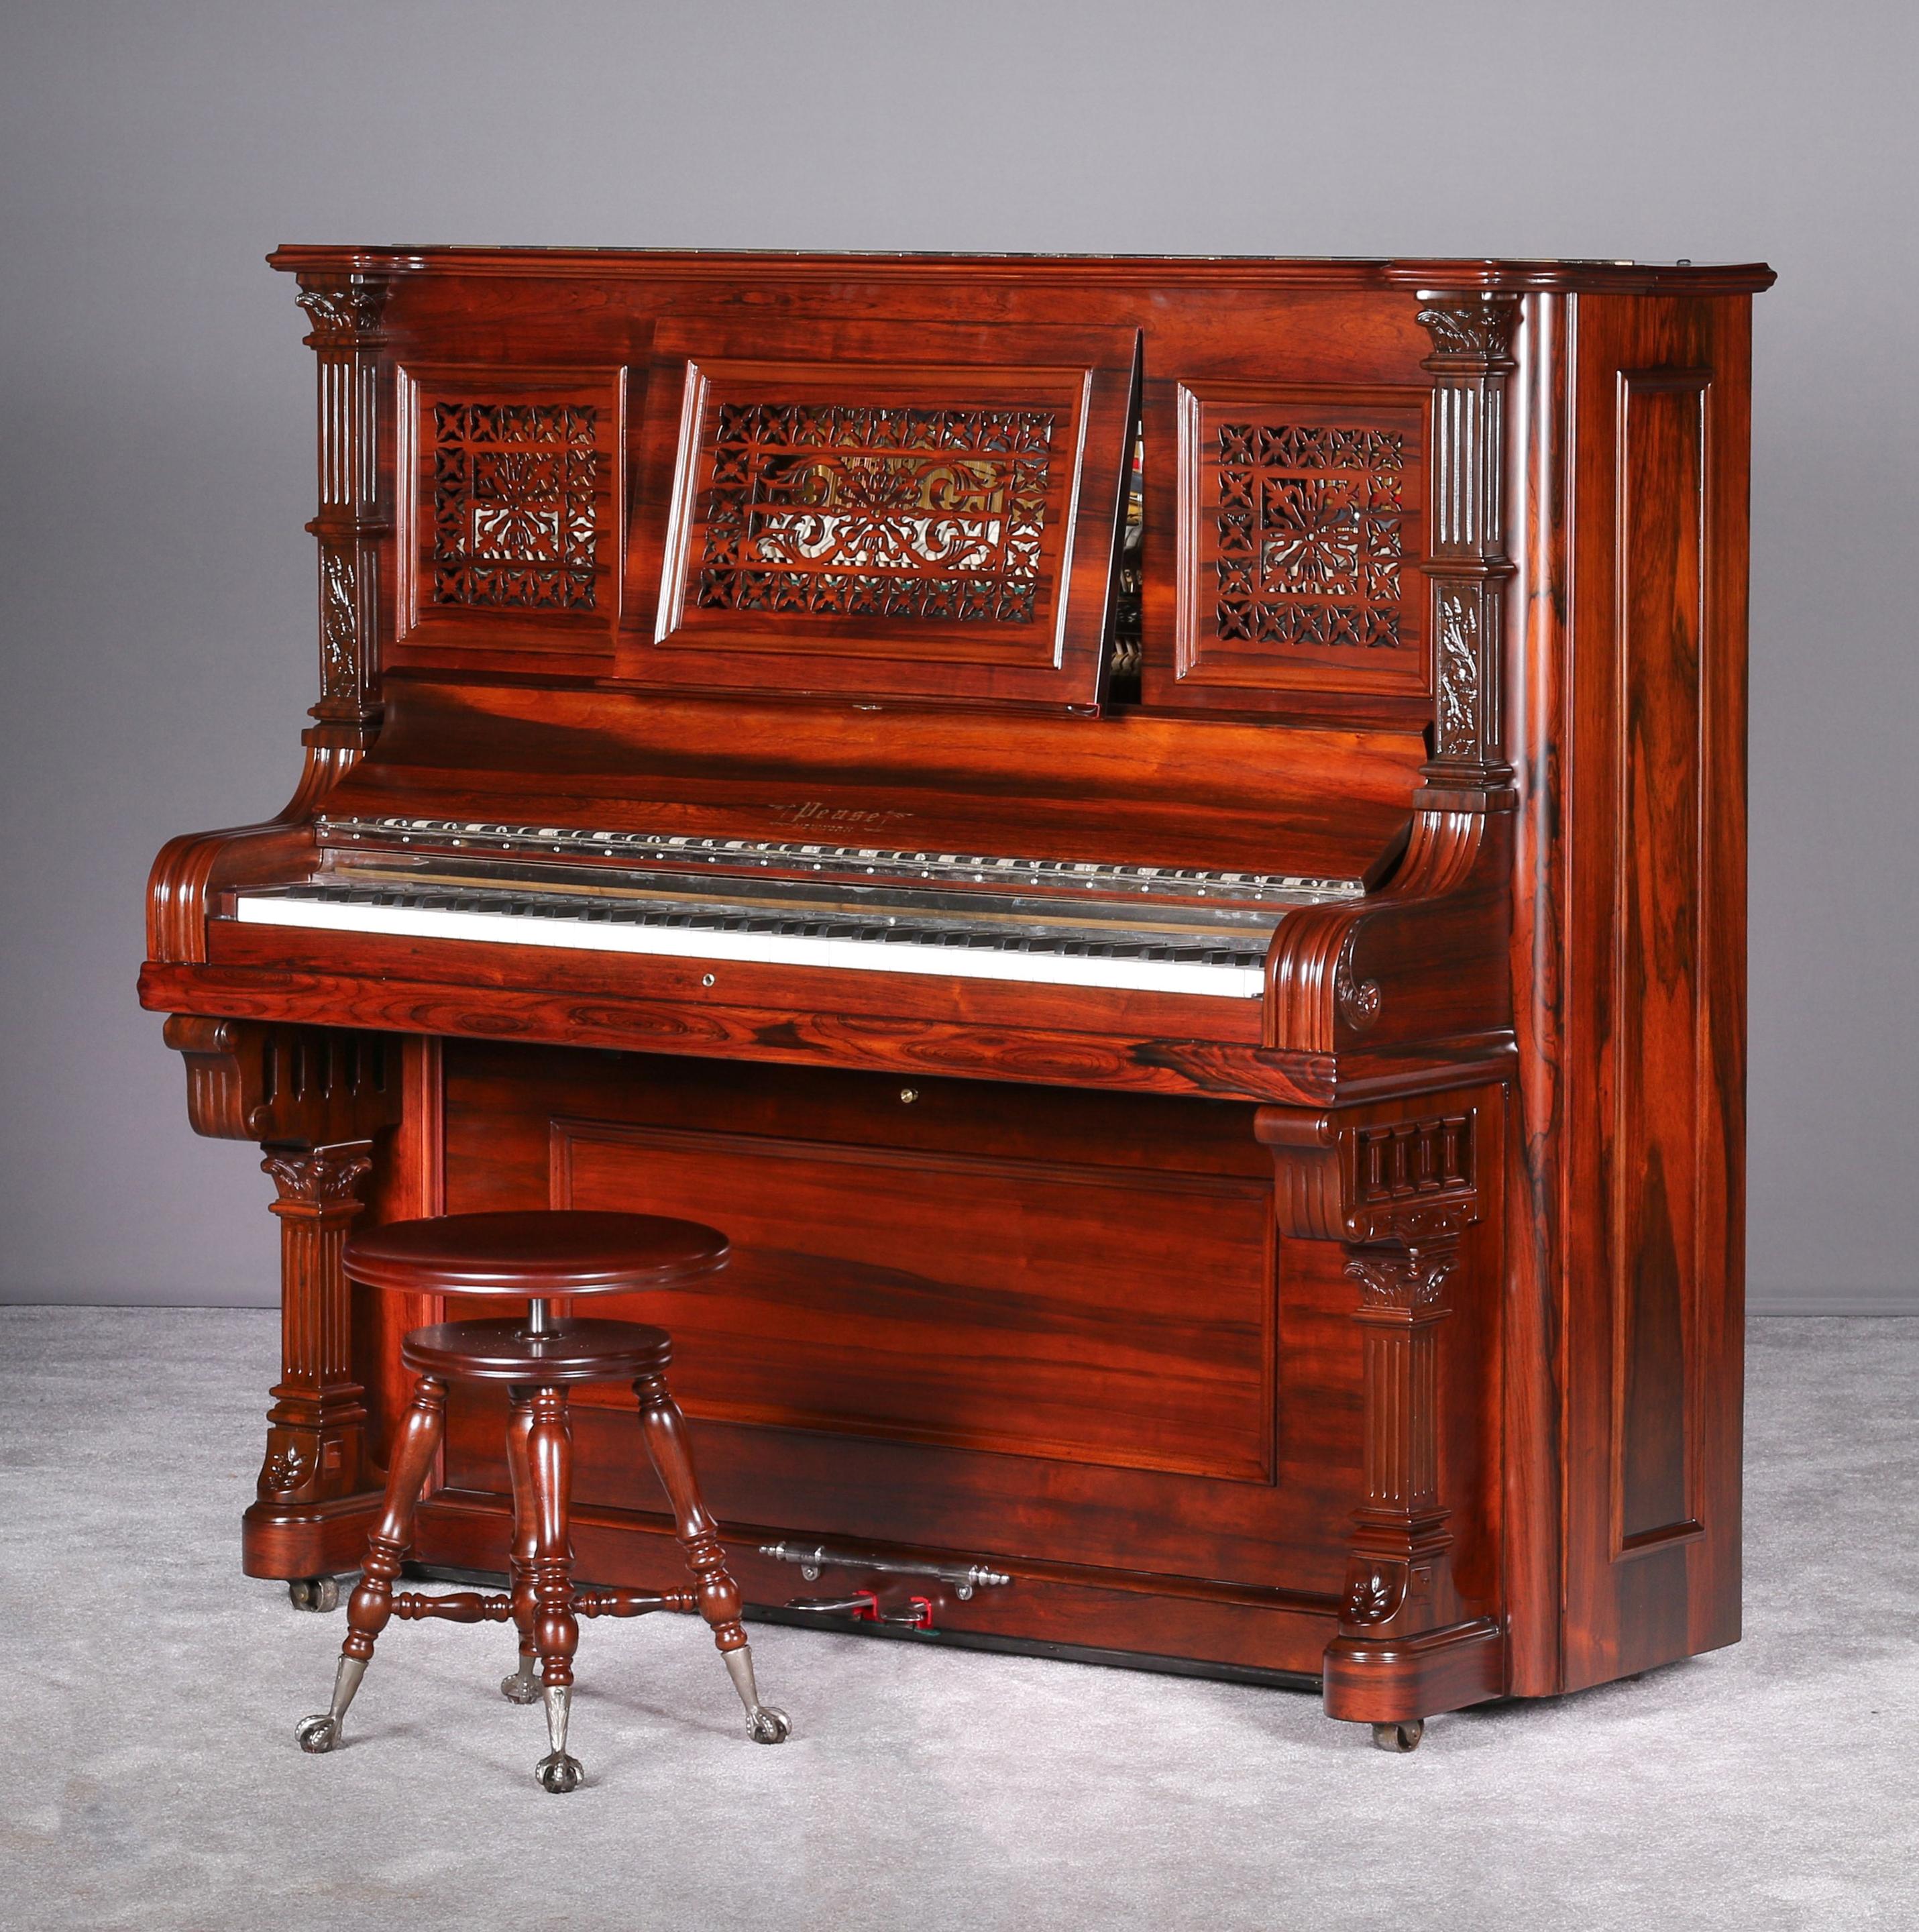 Fully Restored 1891 Pease Upright Piano - Art by Unknown